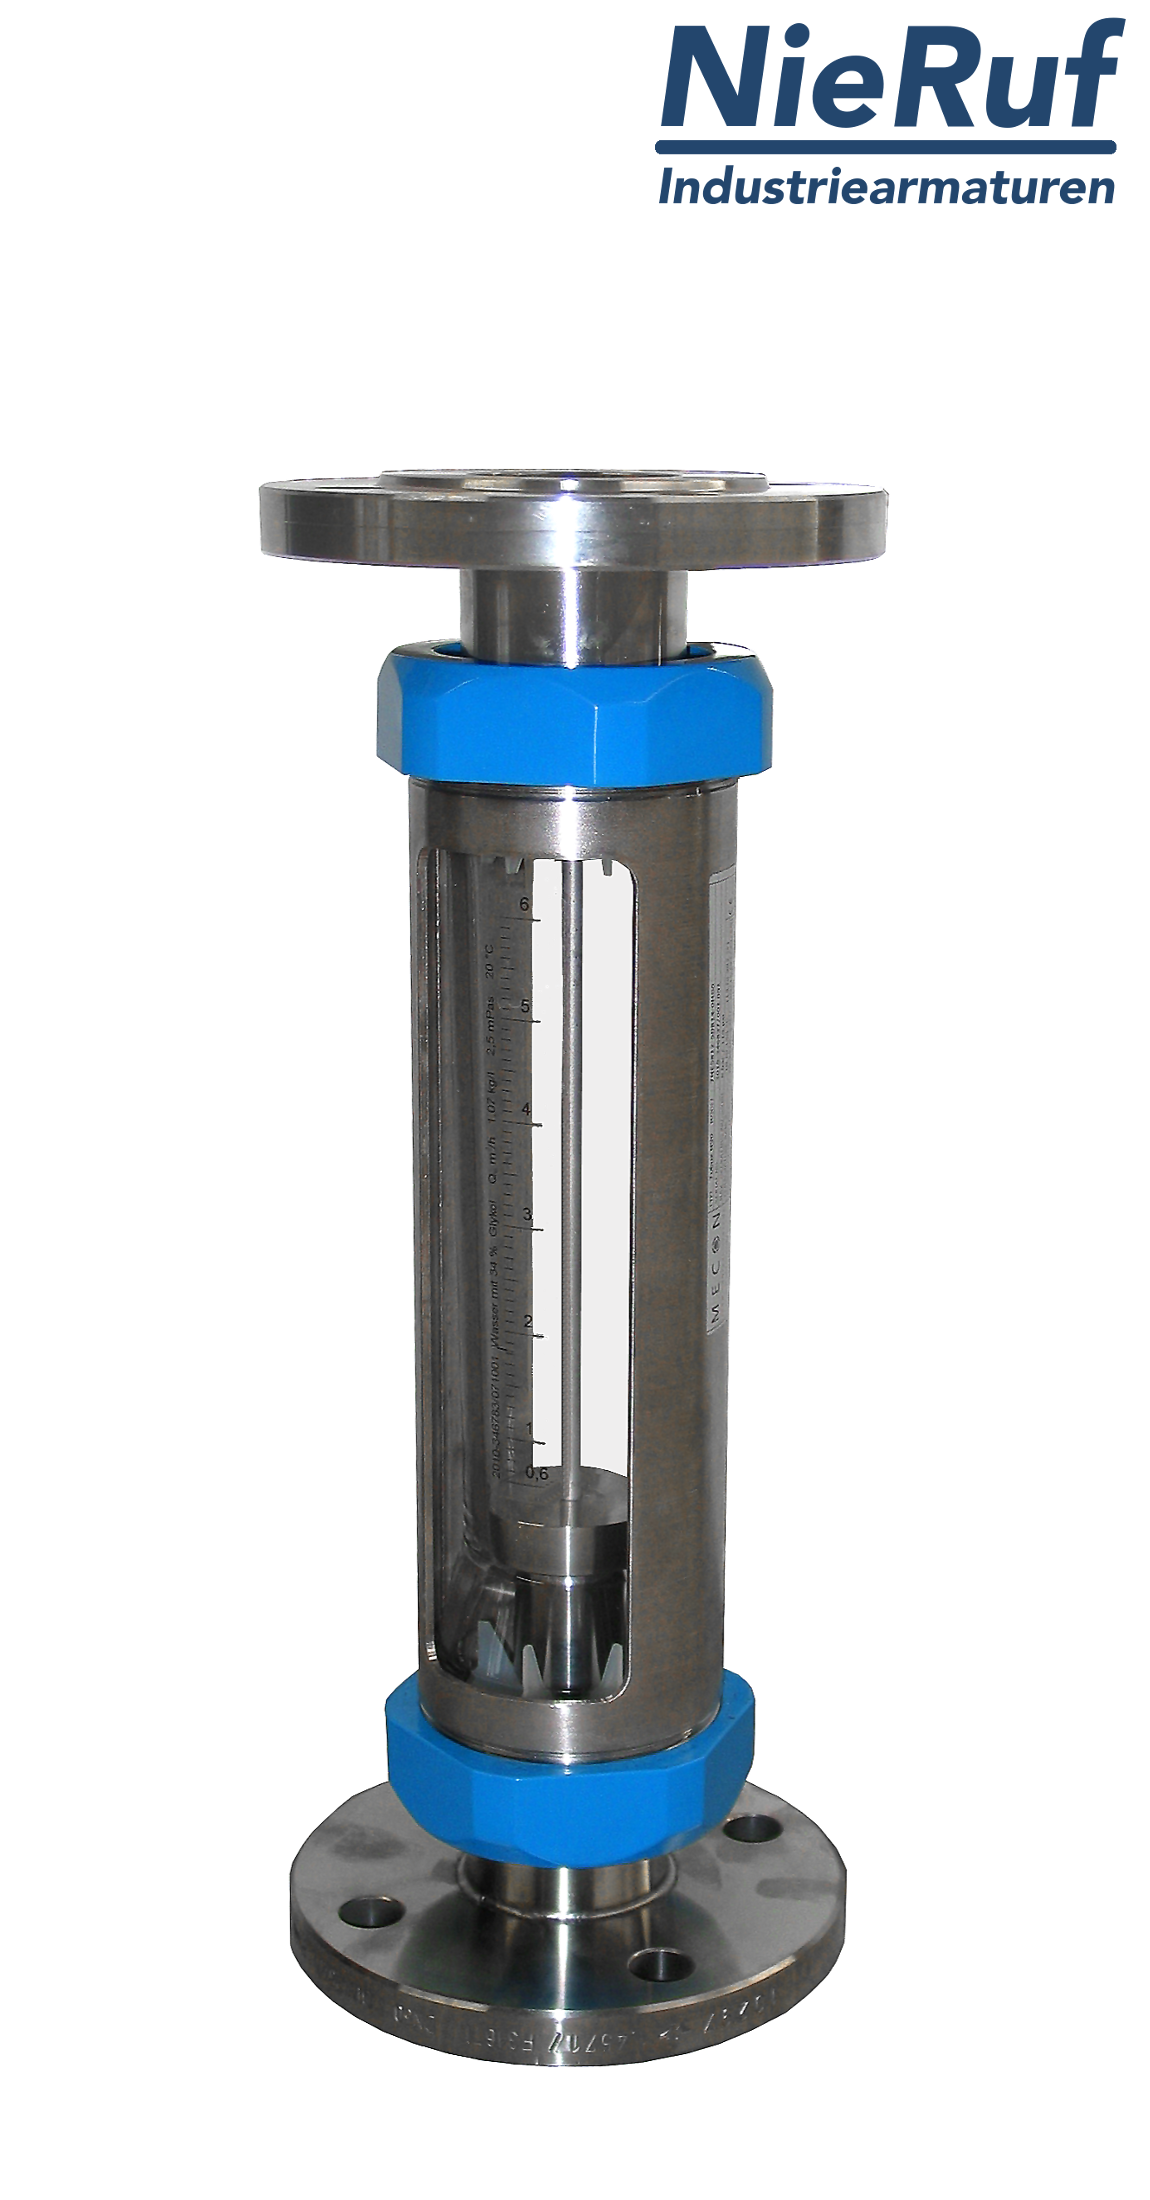 Variable area flowmeter stainless steel + borosilicate flange DN25 10.0 - 100.0 l/h water FKM